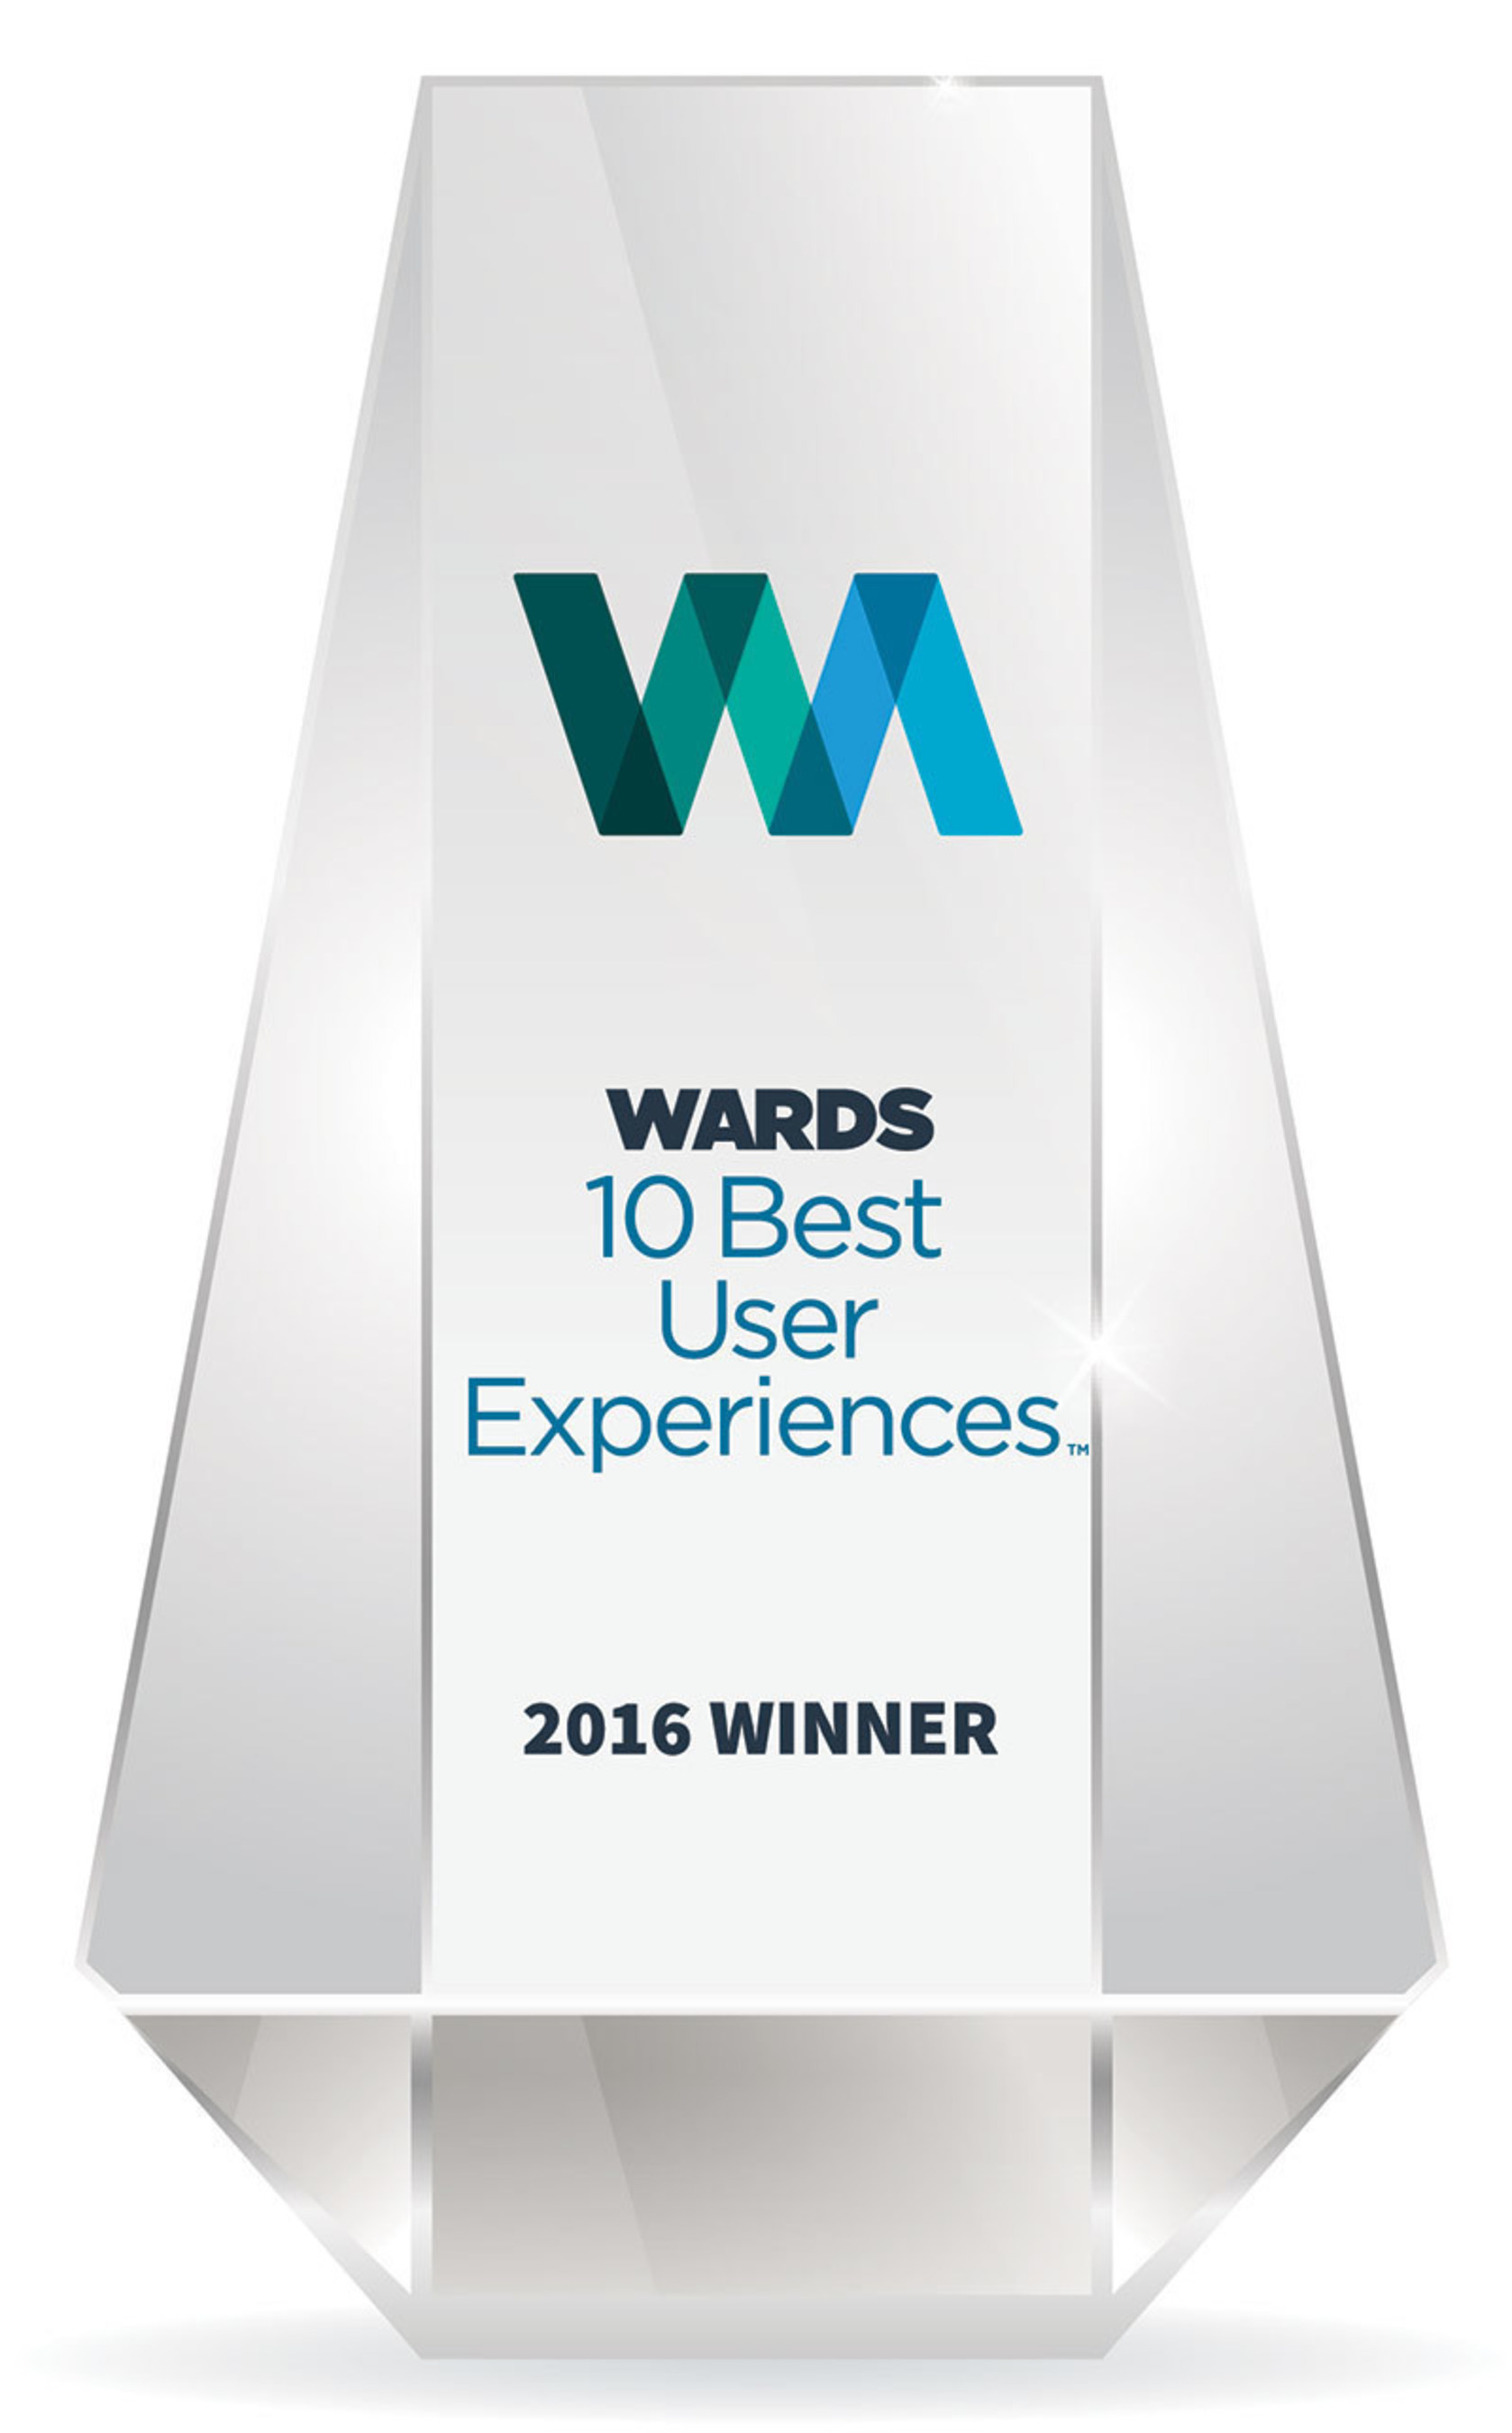 WARDS 10 BEST USER EXPERIENCES OF 2016 ANNOUNCED BY PENTON'S WARDSAUTO